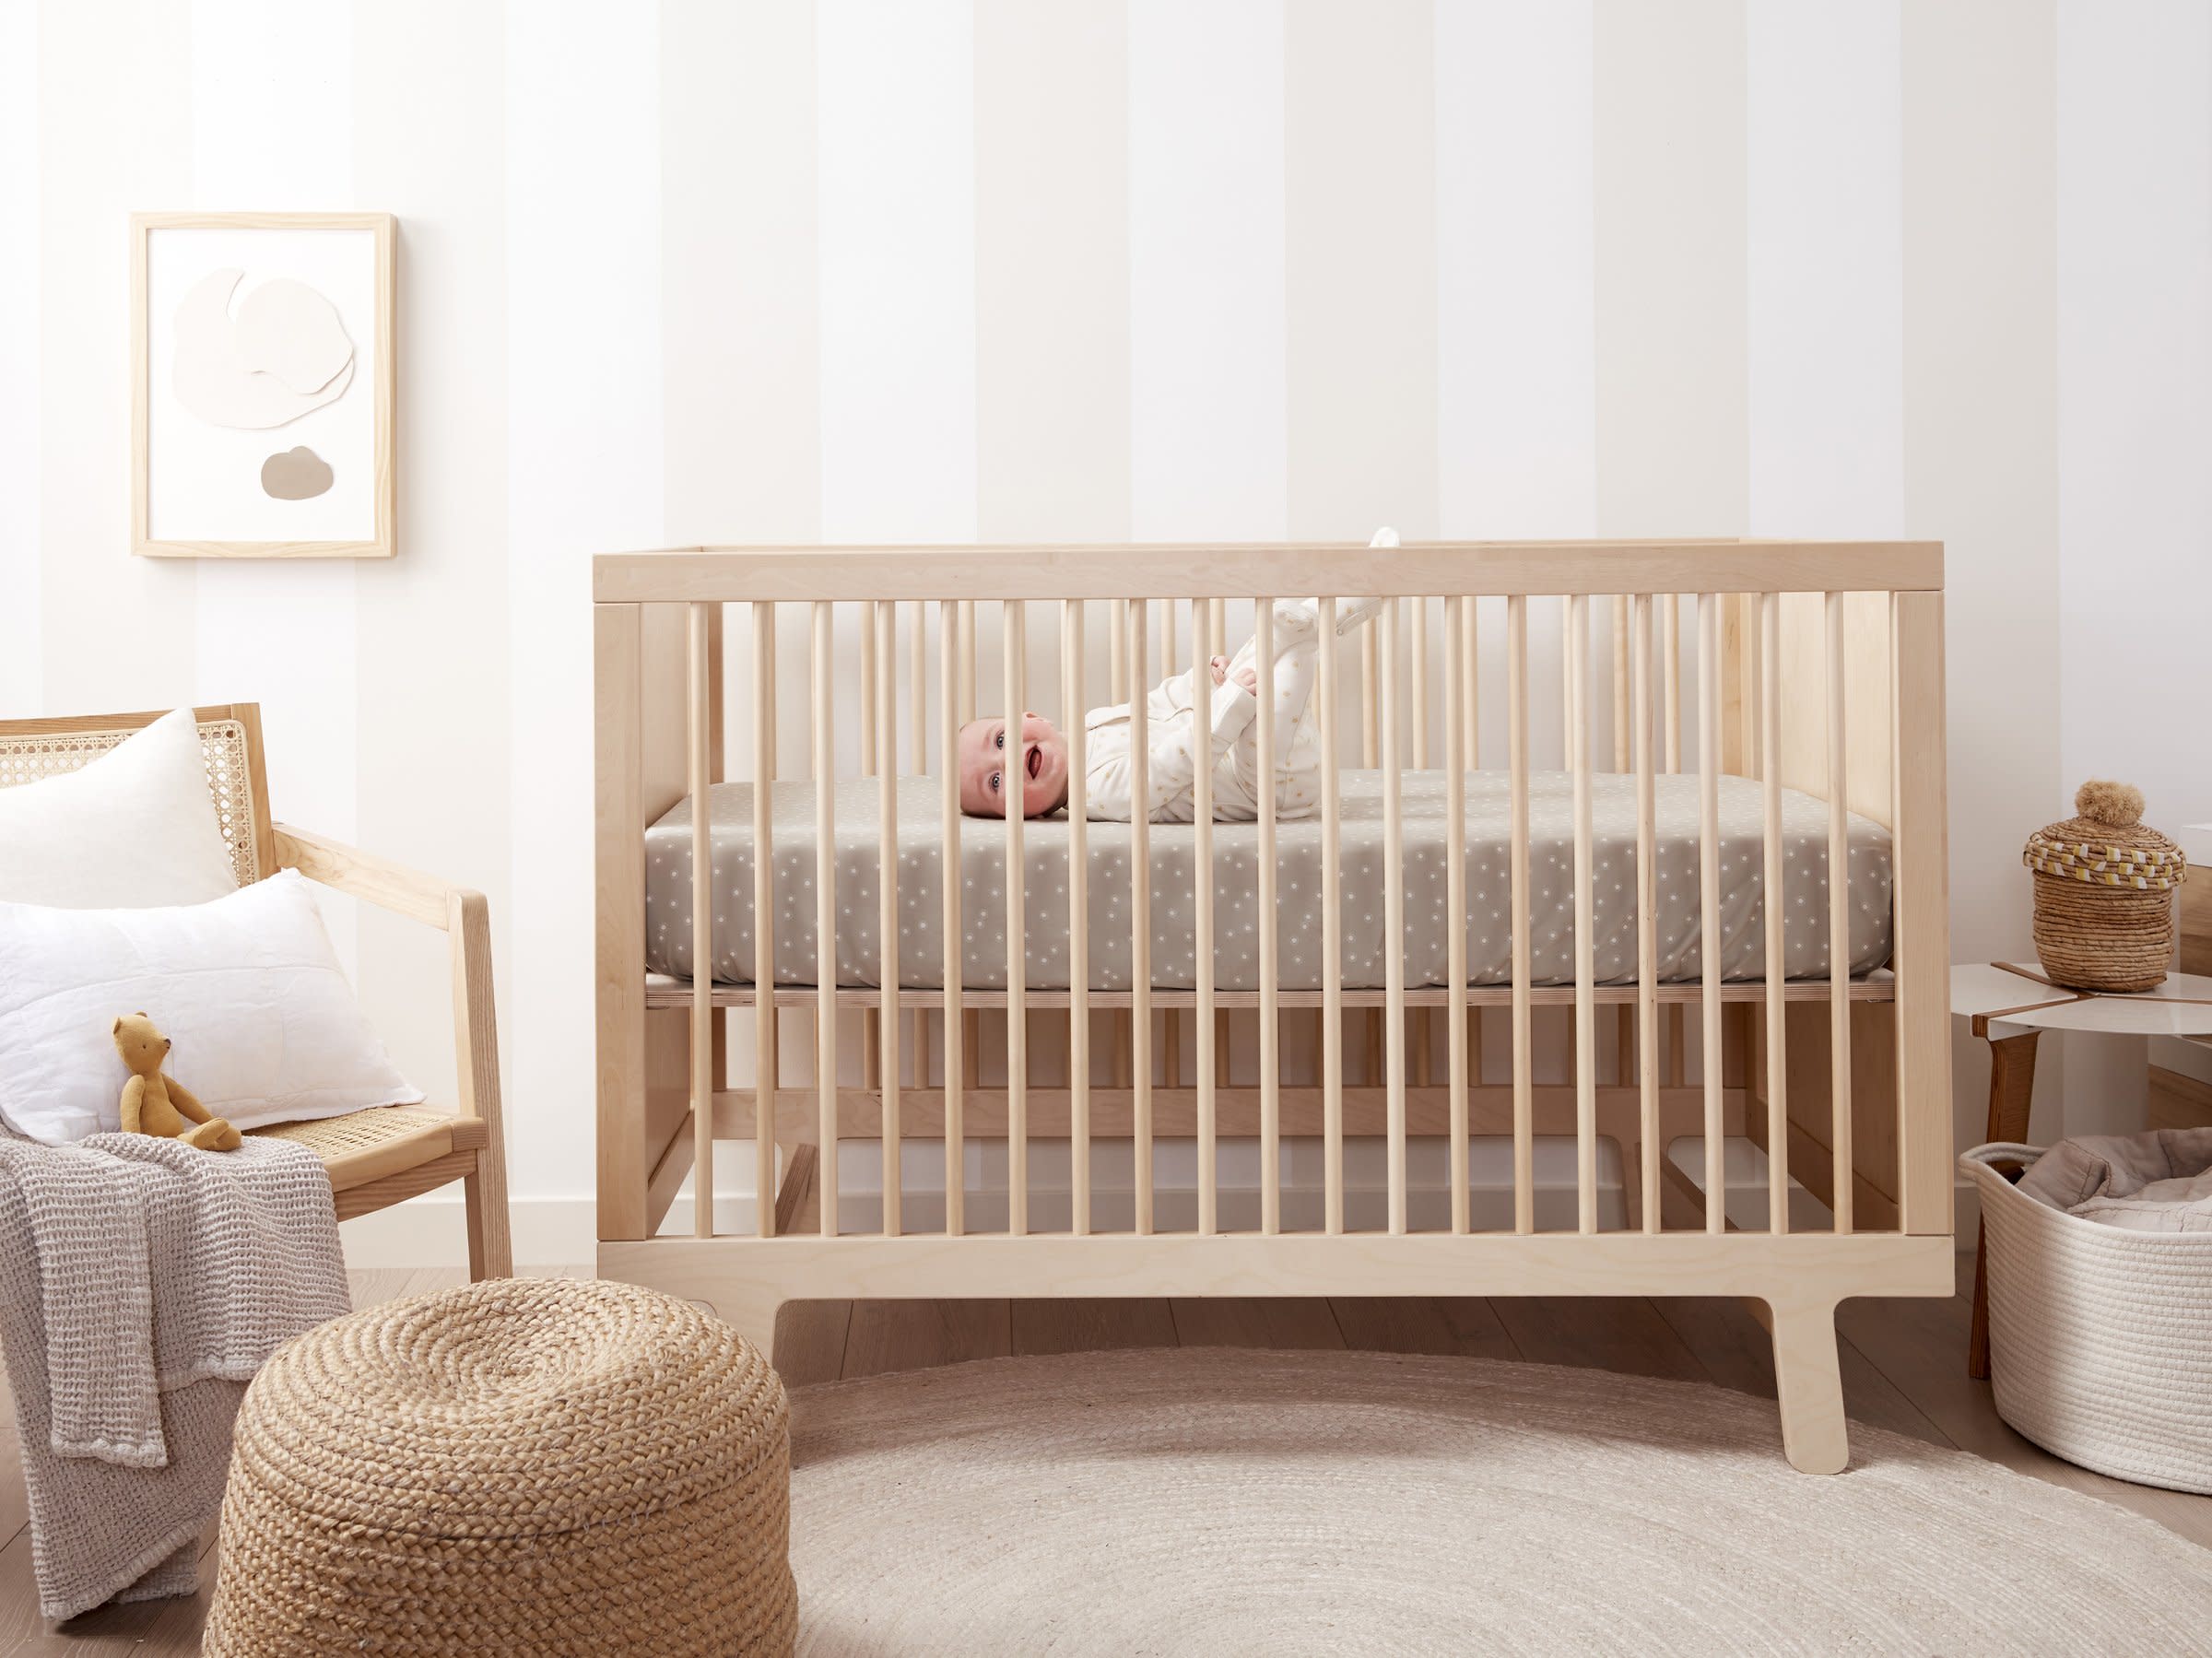 Sparrow Crib Shown In A Room